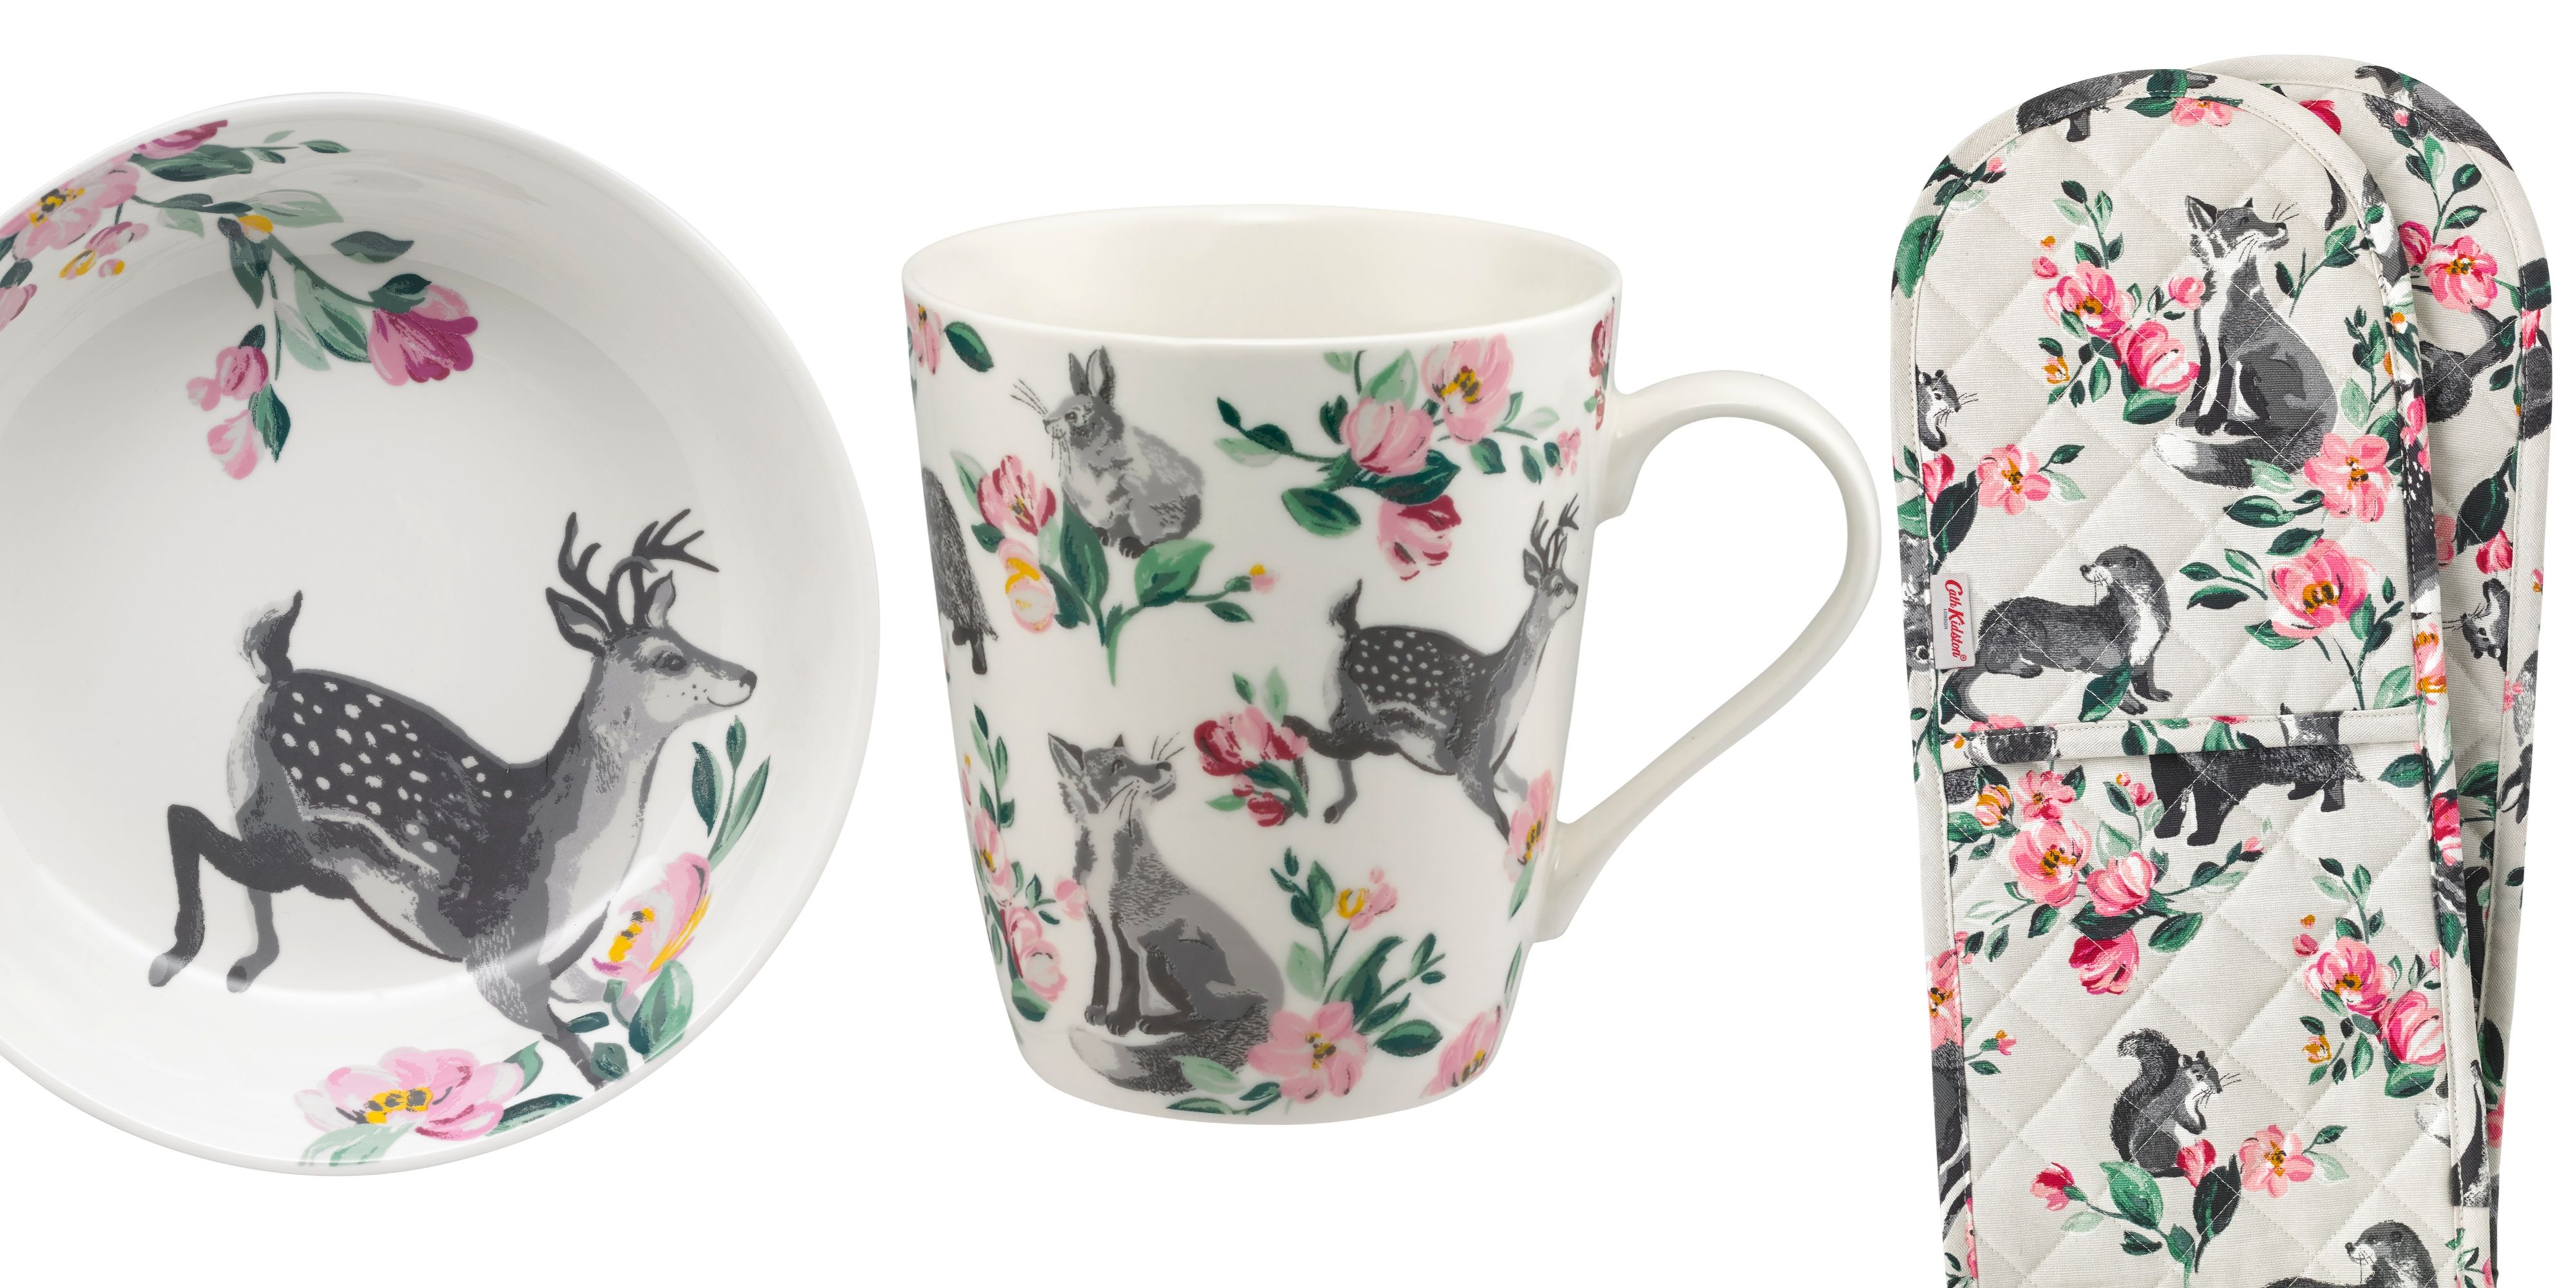 badgers and friends cath kidston